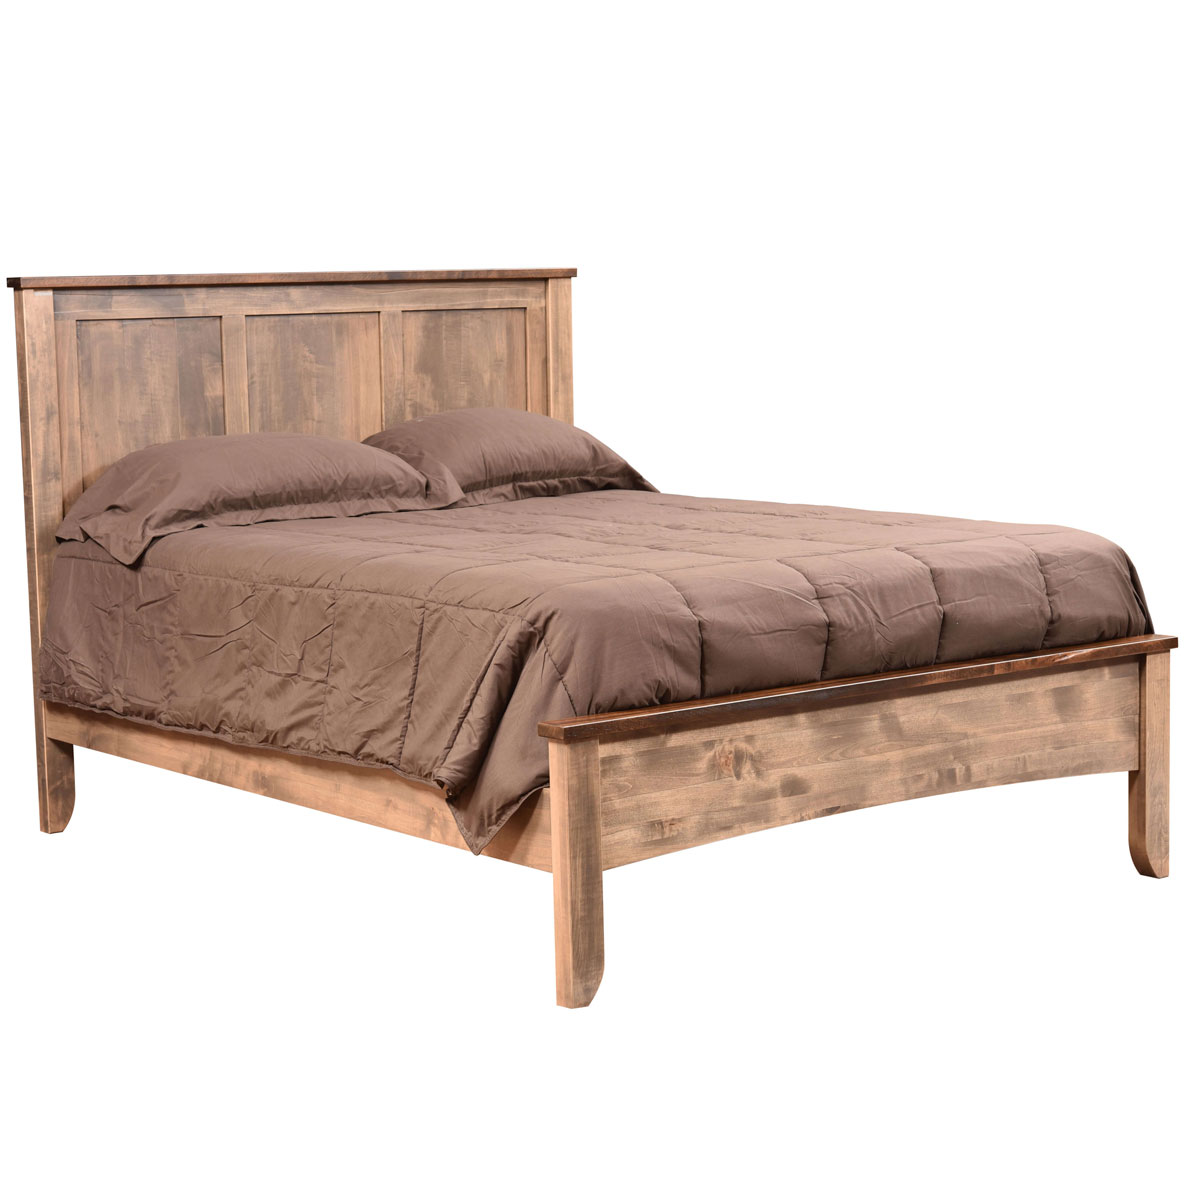 Roxbury Rustic Smooth Bed shown in Brown Maple with Legacy Chocolate Stain Top and Legacy Toast Stain Bottom